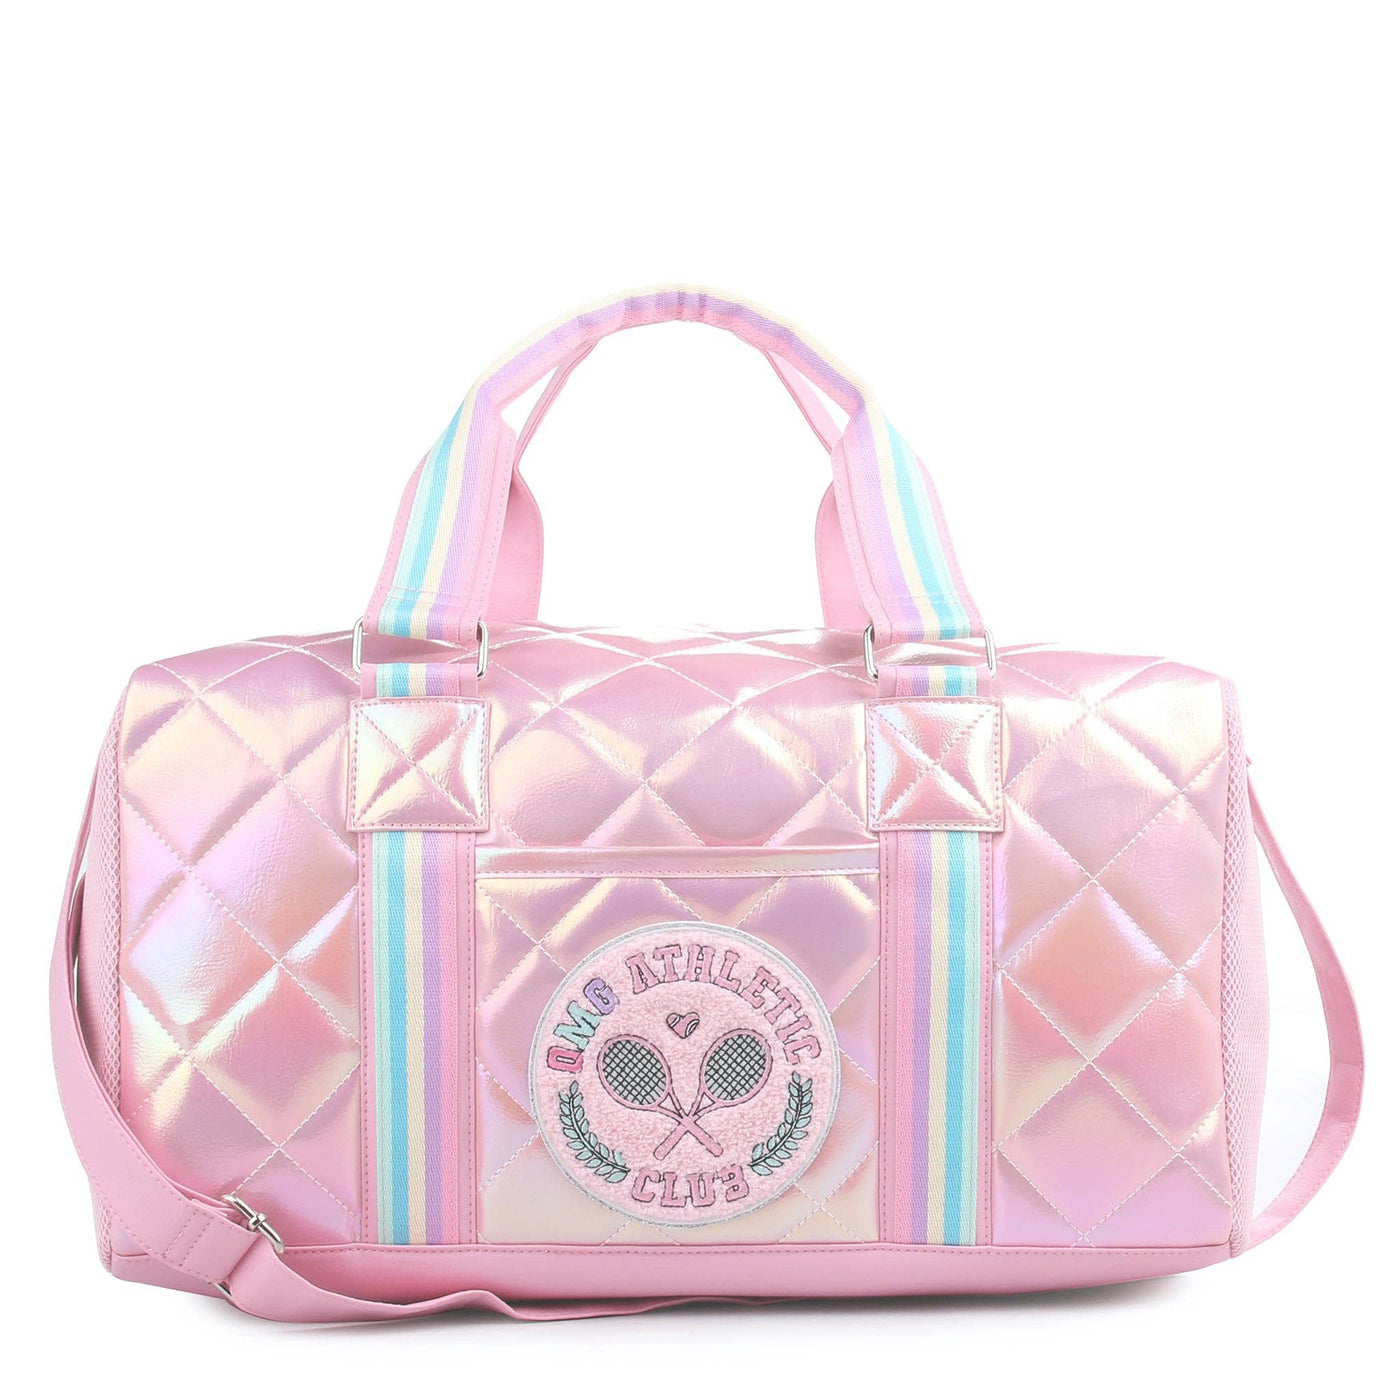 Miss Gwen's OMG Accessories - OMG Athletic Club Quilted Metallic Large Duffle Bag